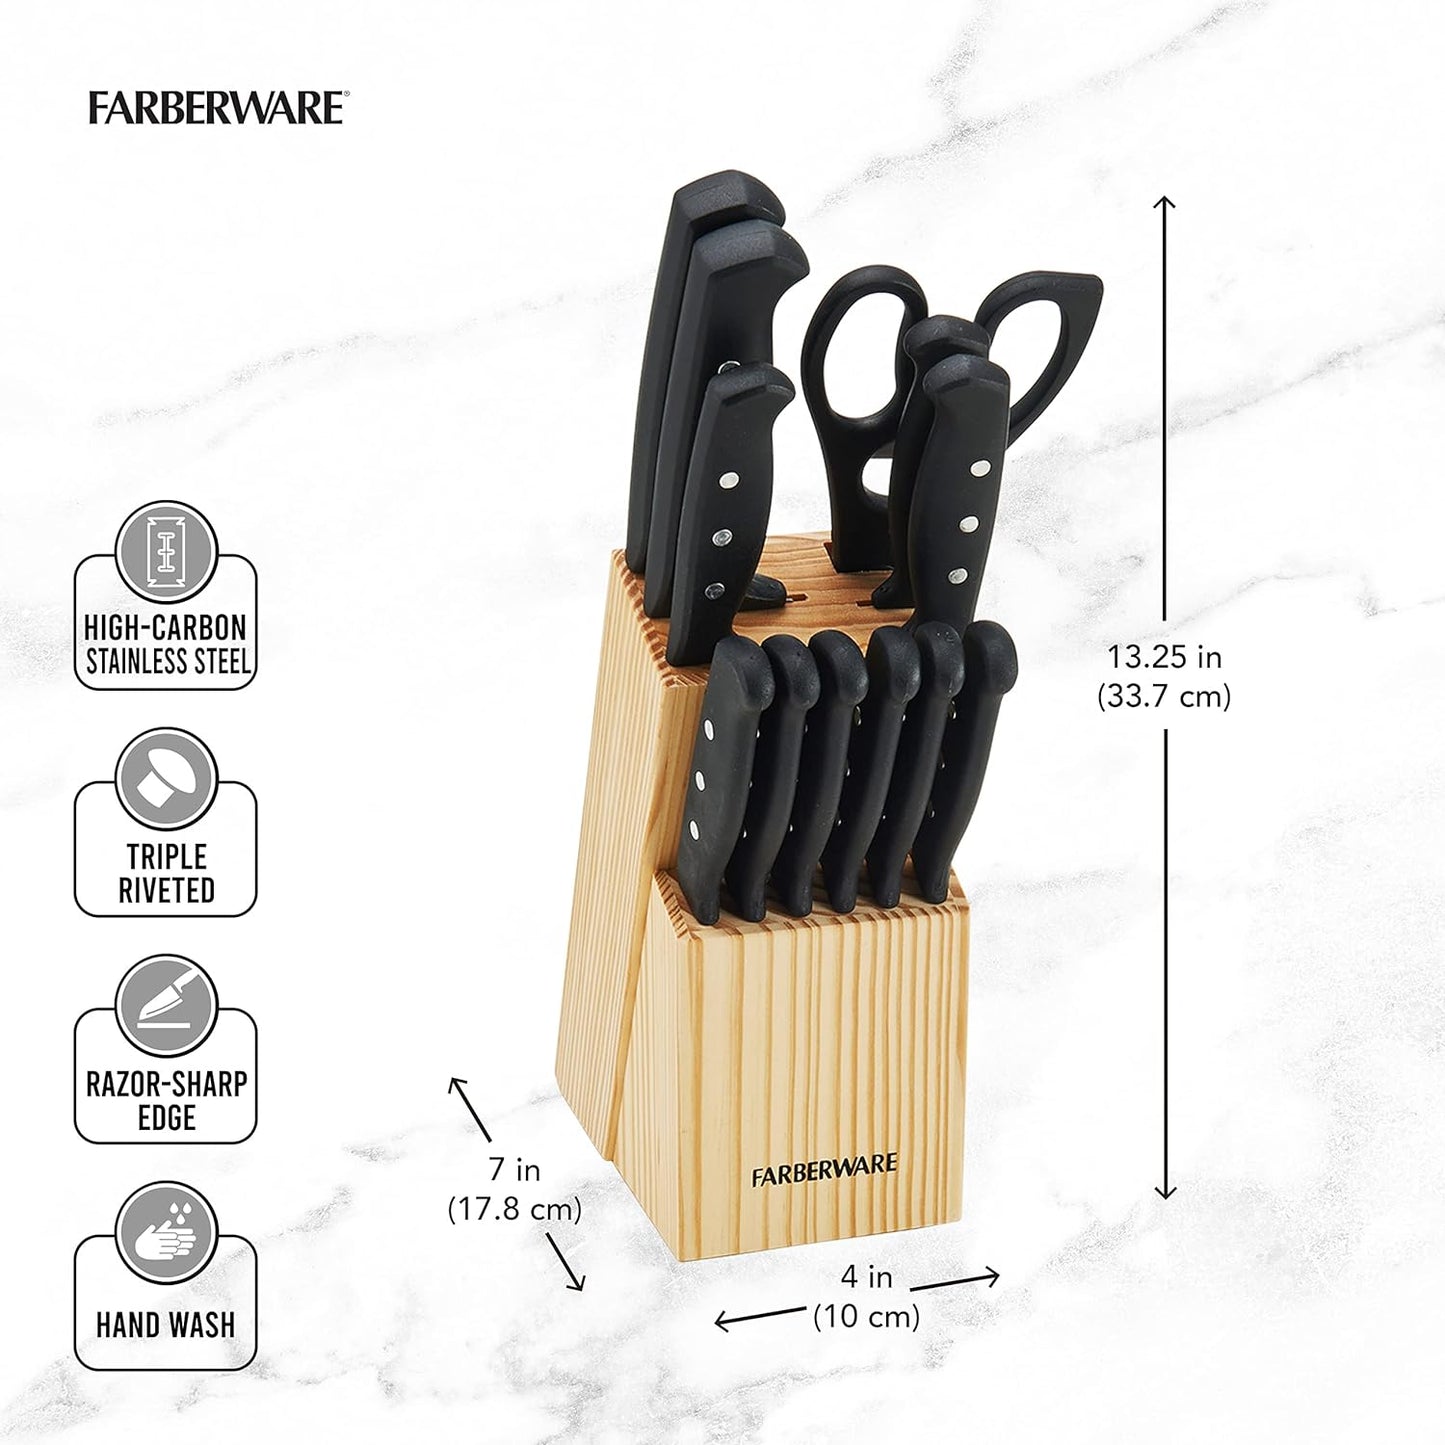 22-Piece Never Needs Sharpening Triple Rivet High-Carbon Stainless Steel Knives